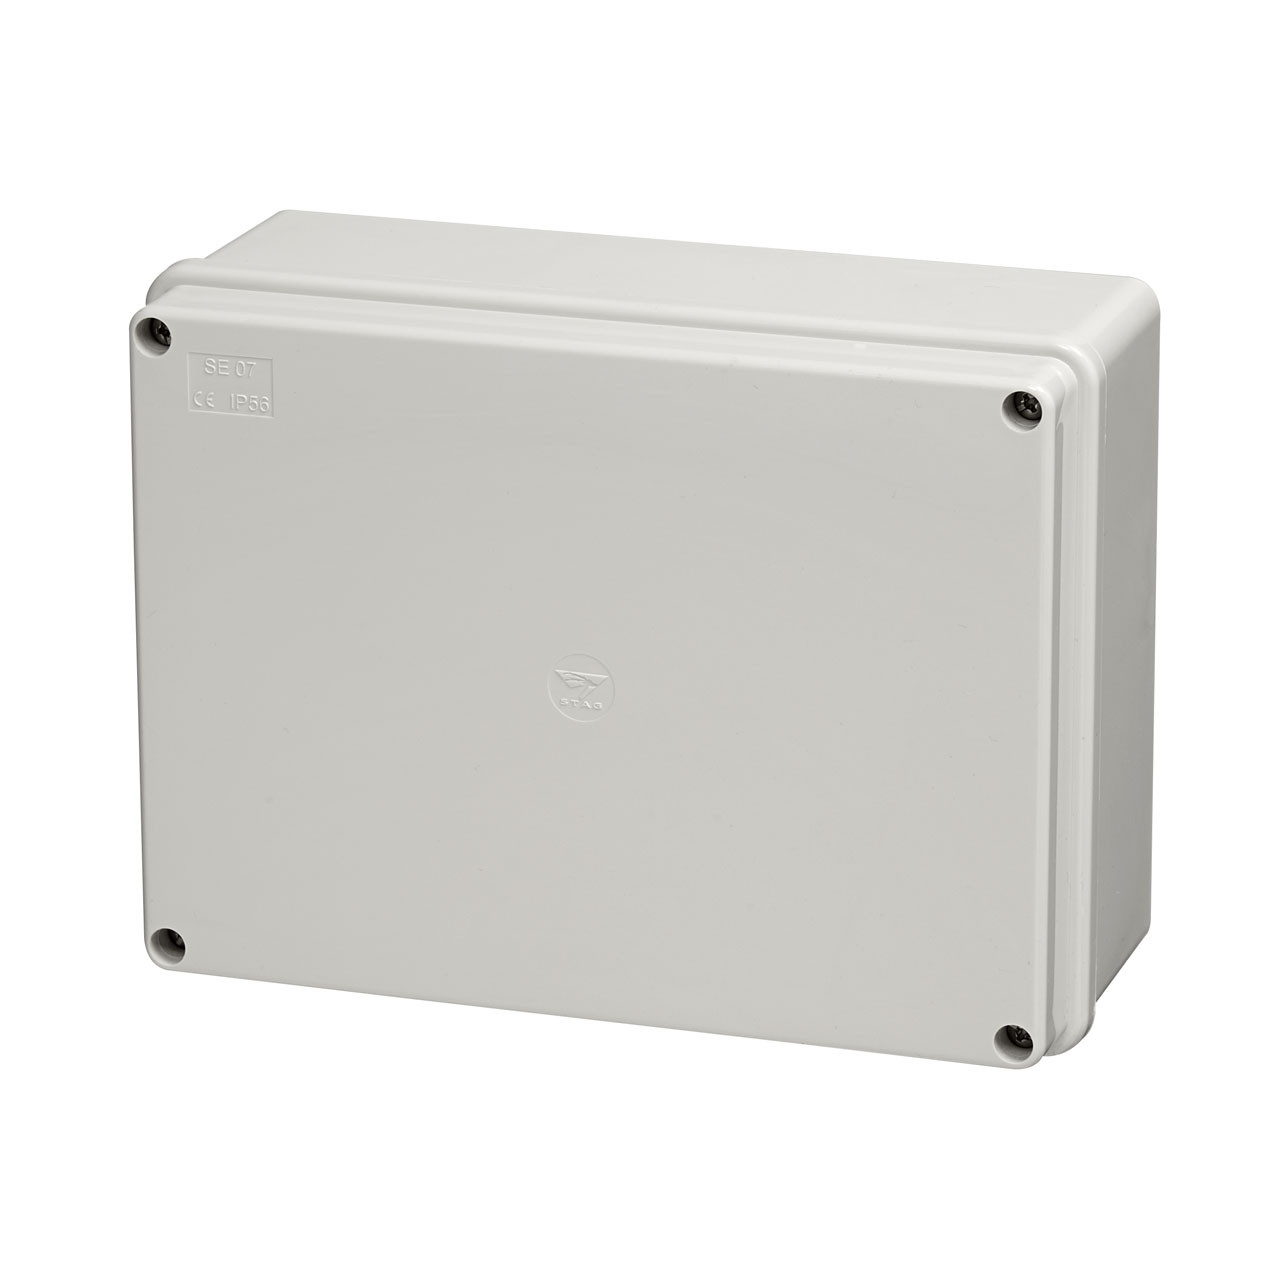 Photograph of Stag SE07 190X140X70mm IP56 Enclosure